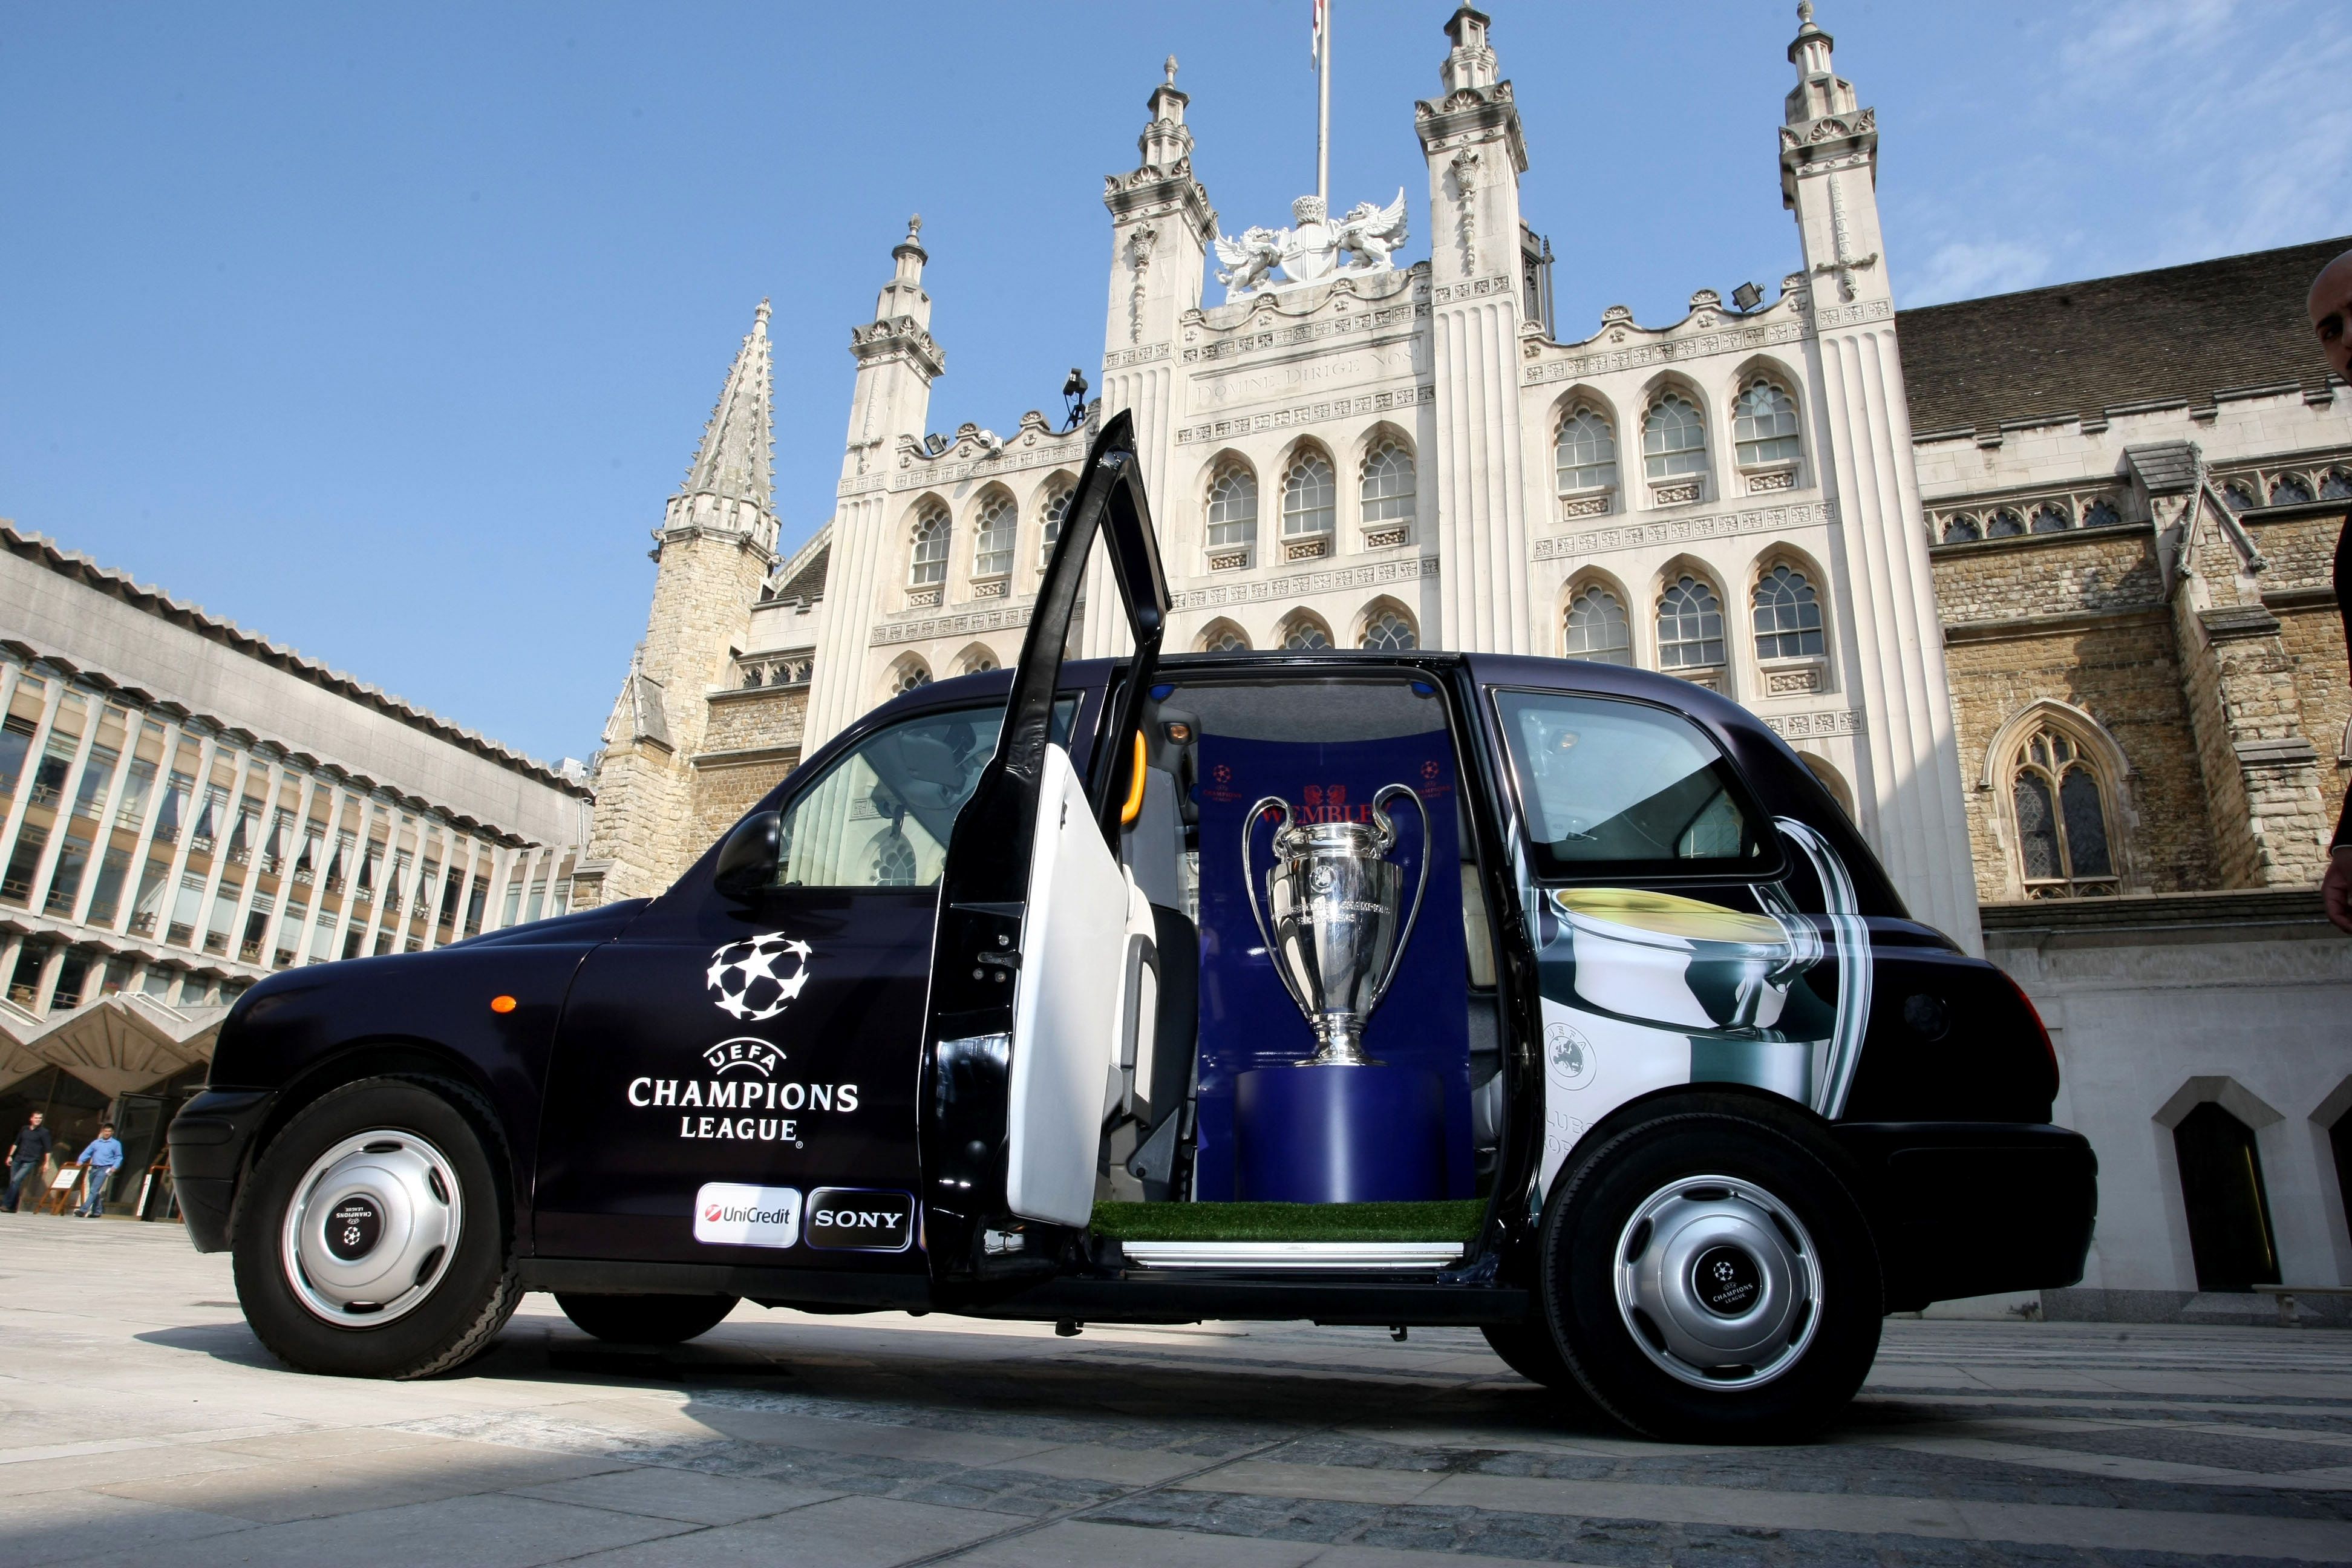 Champions League trophy arrives in a black cab ahead of the final to be played at Wembley stadium